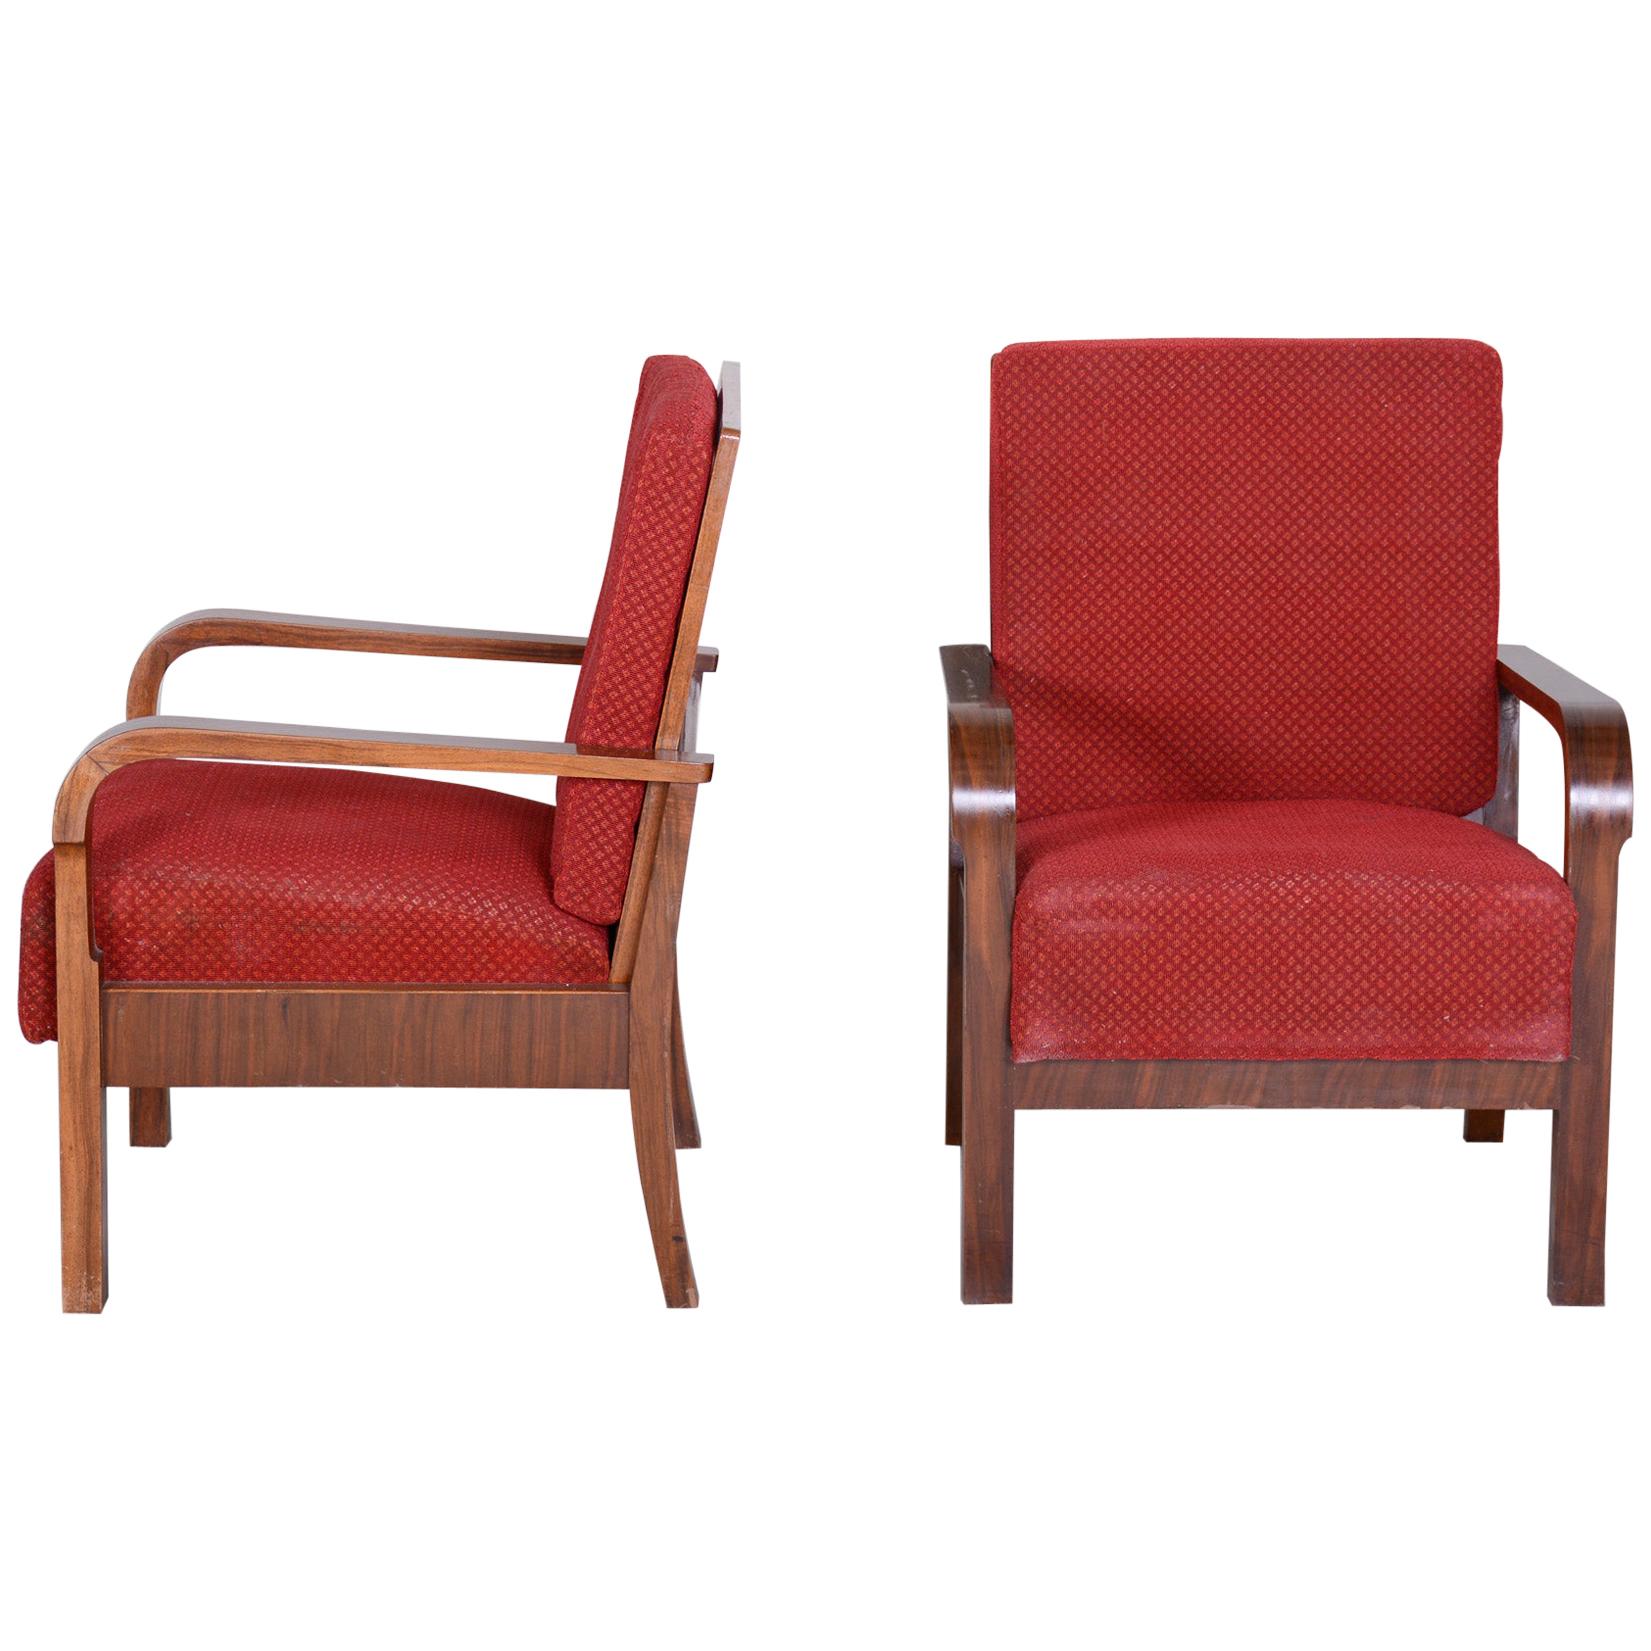 Pair of Walnut Positioning Armchairs, Original upholstery, Restored wood, 1930s